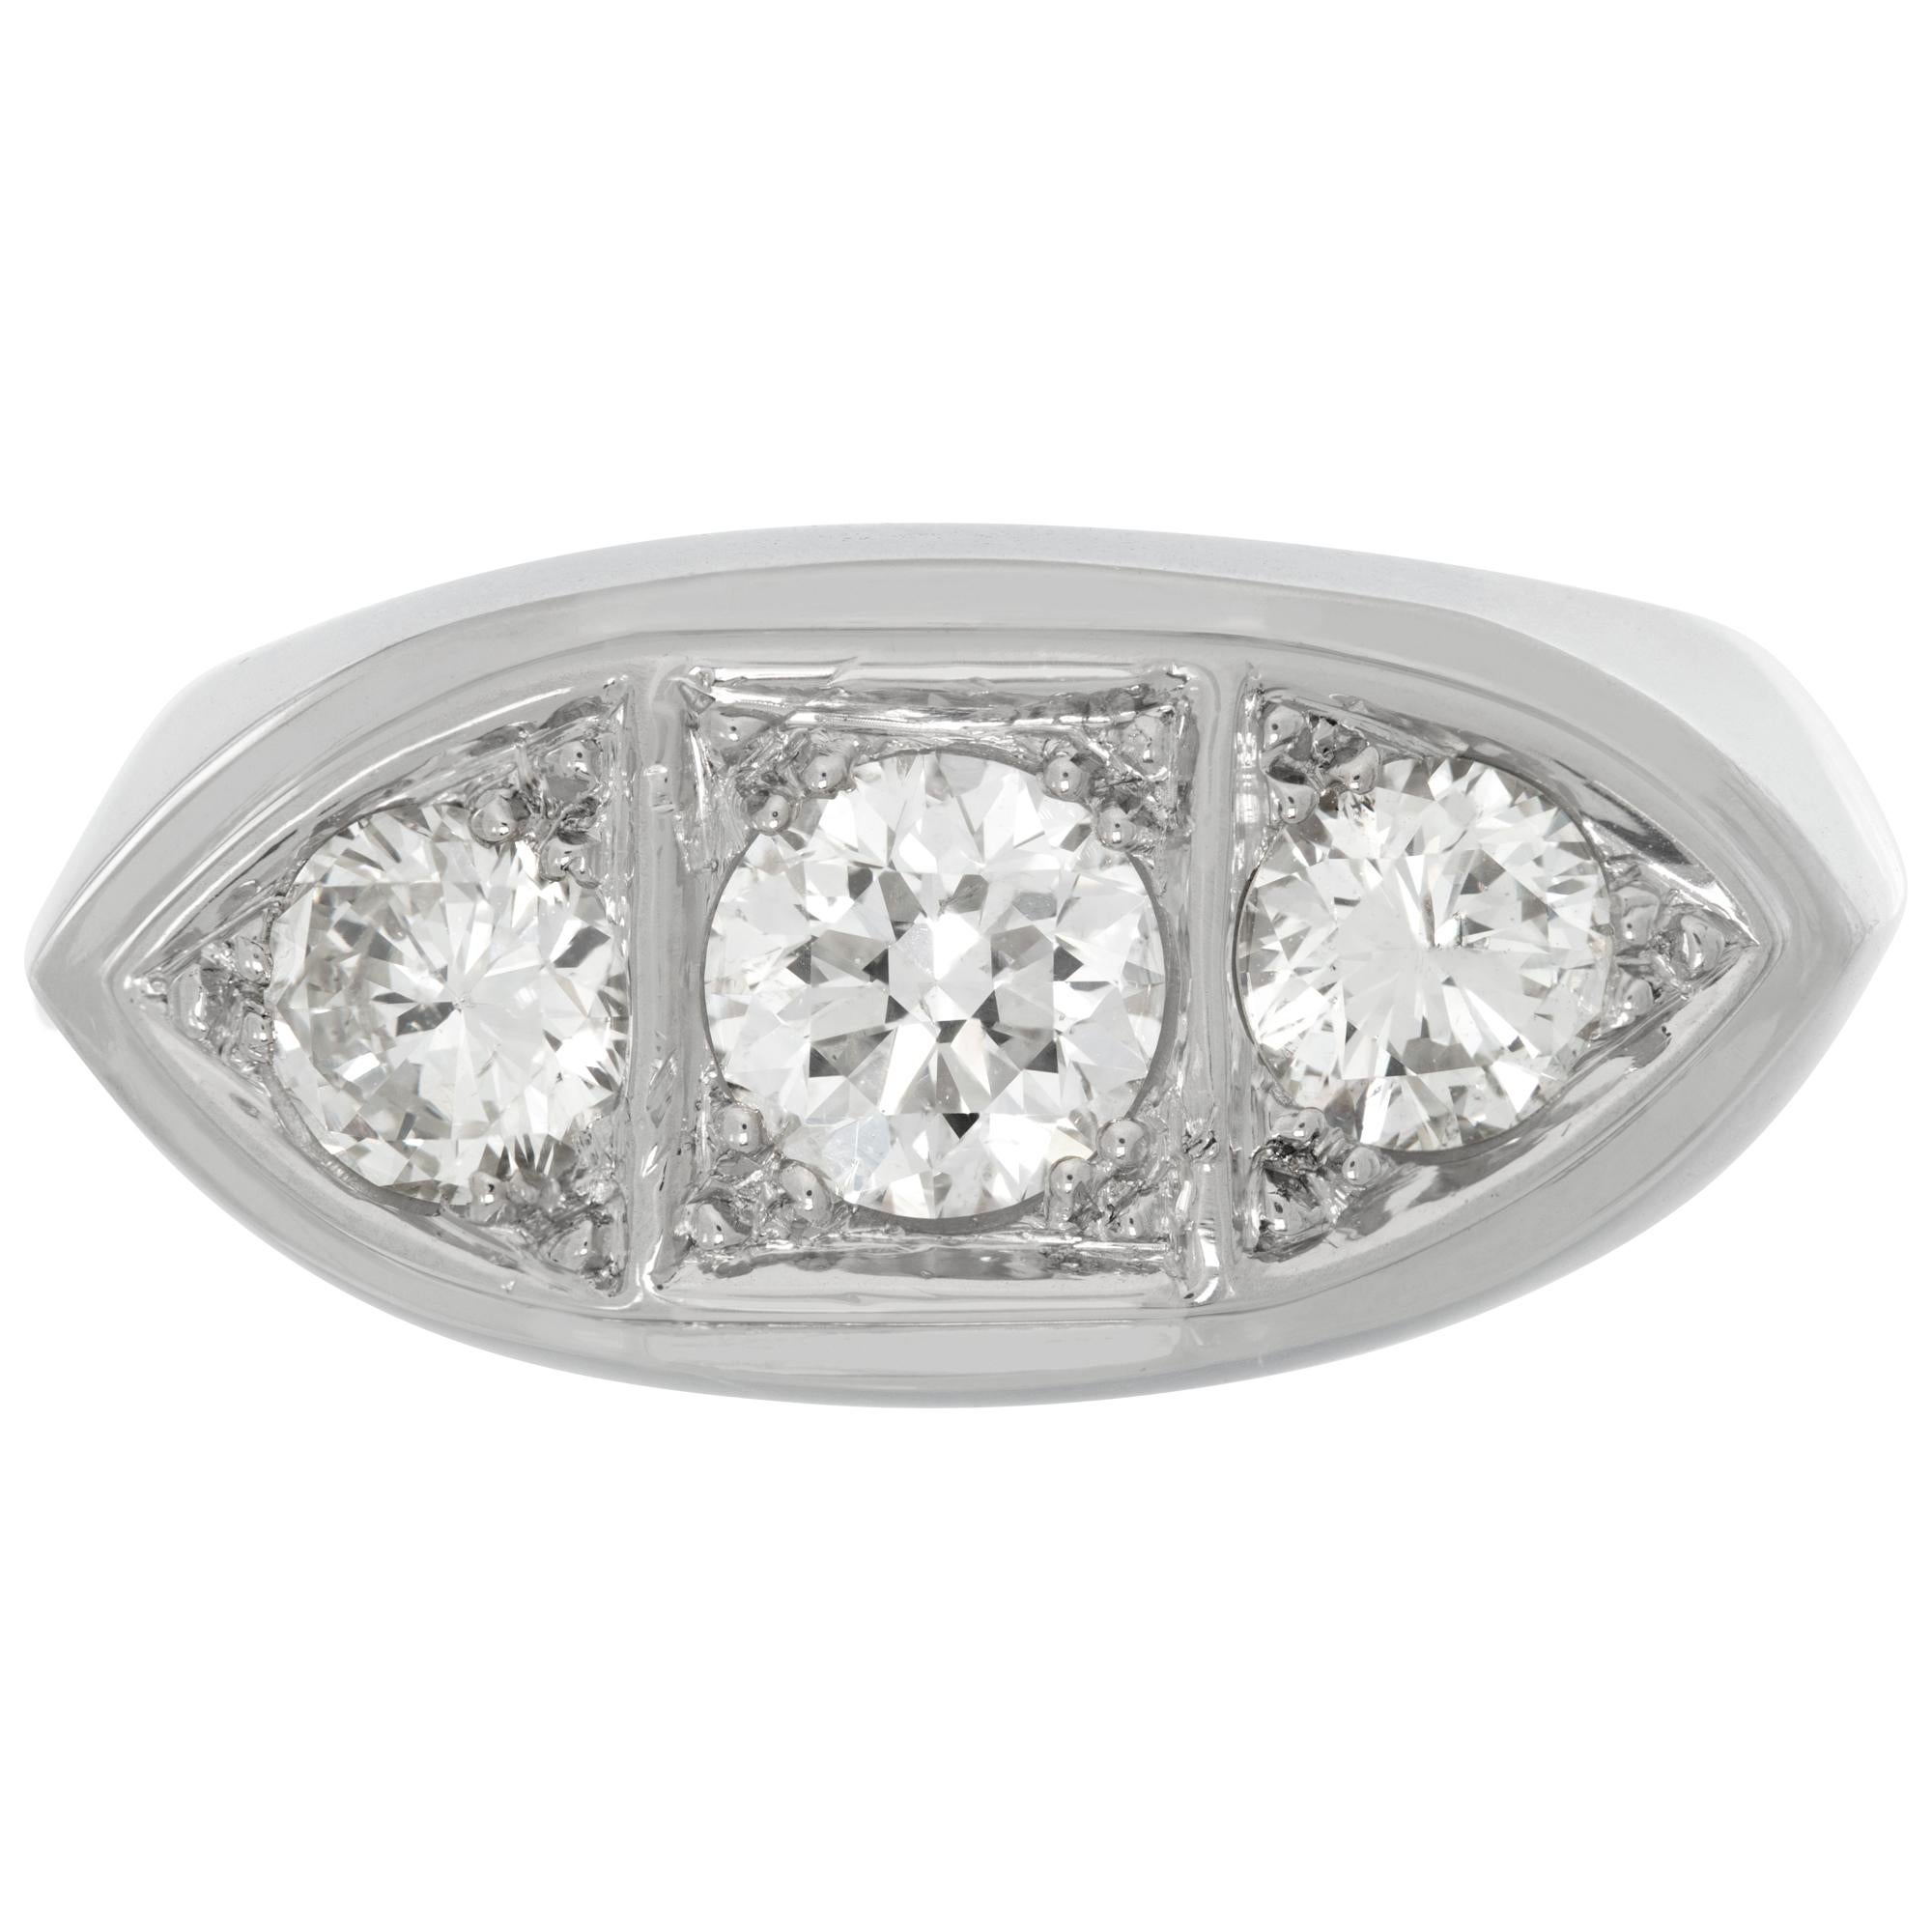 GIA certified round brilliant cut diamond 1.00 carat (E color, I2 clarity) ring set in robust platinum setting with 2 x 0.50 carats G-H color, SI-I clarity side diamonds. Size 9This GIA certified ring is currently size 9 and some items can be sized